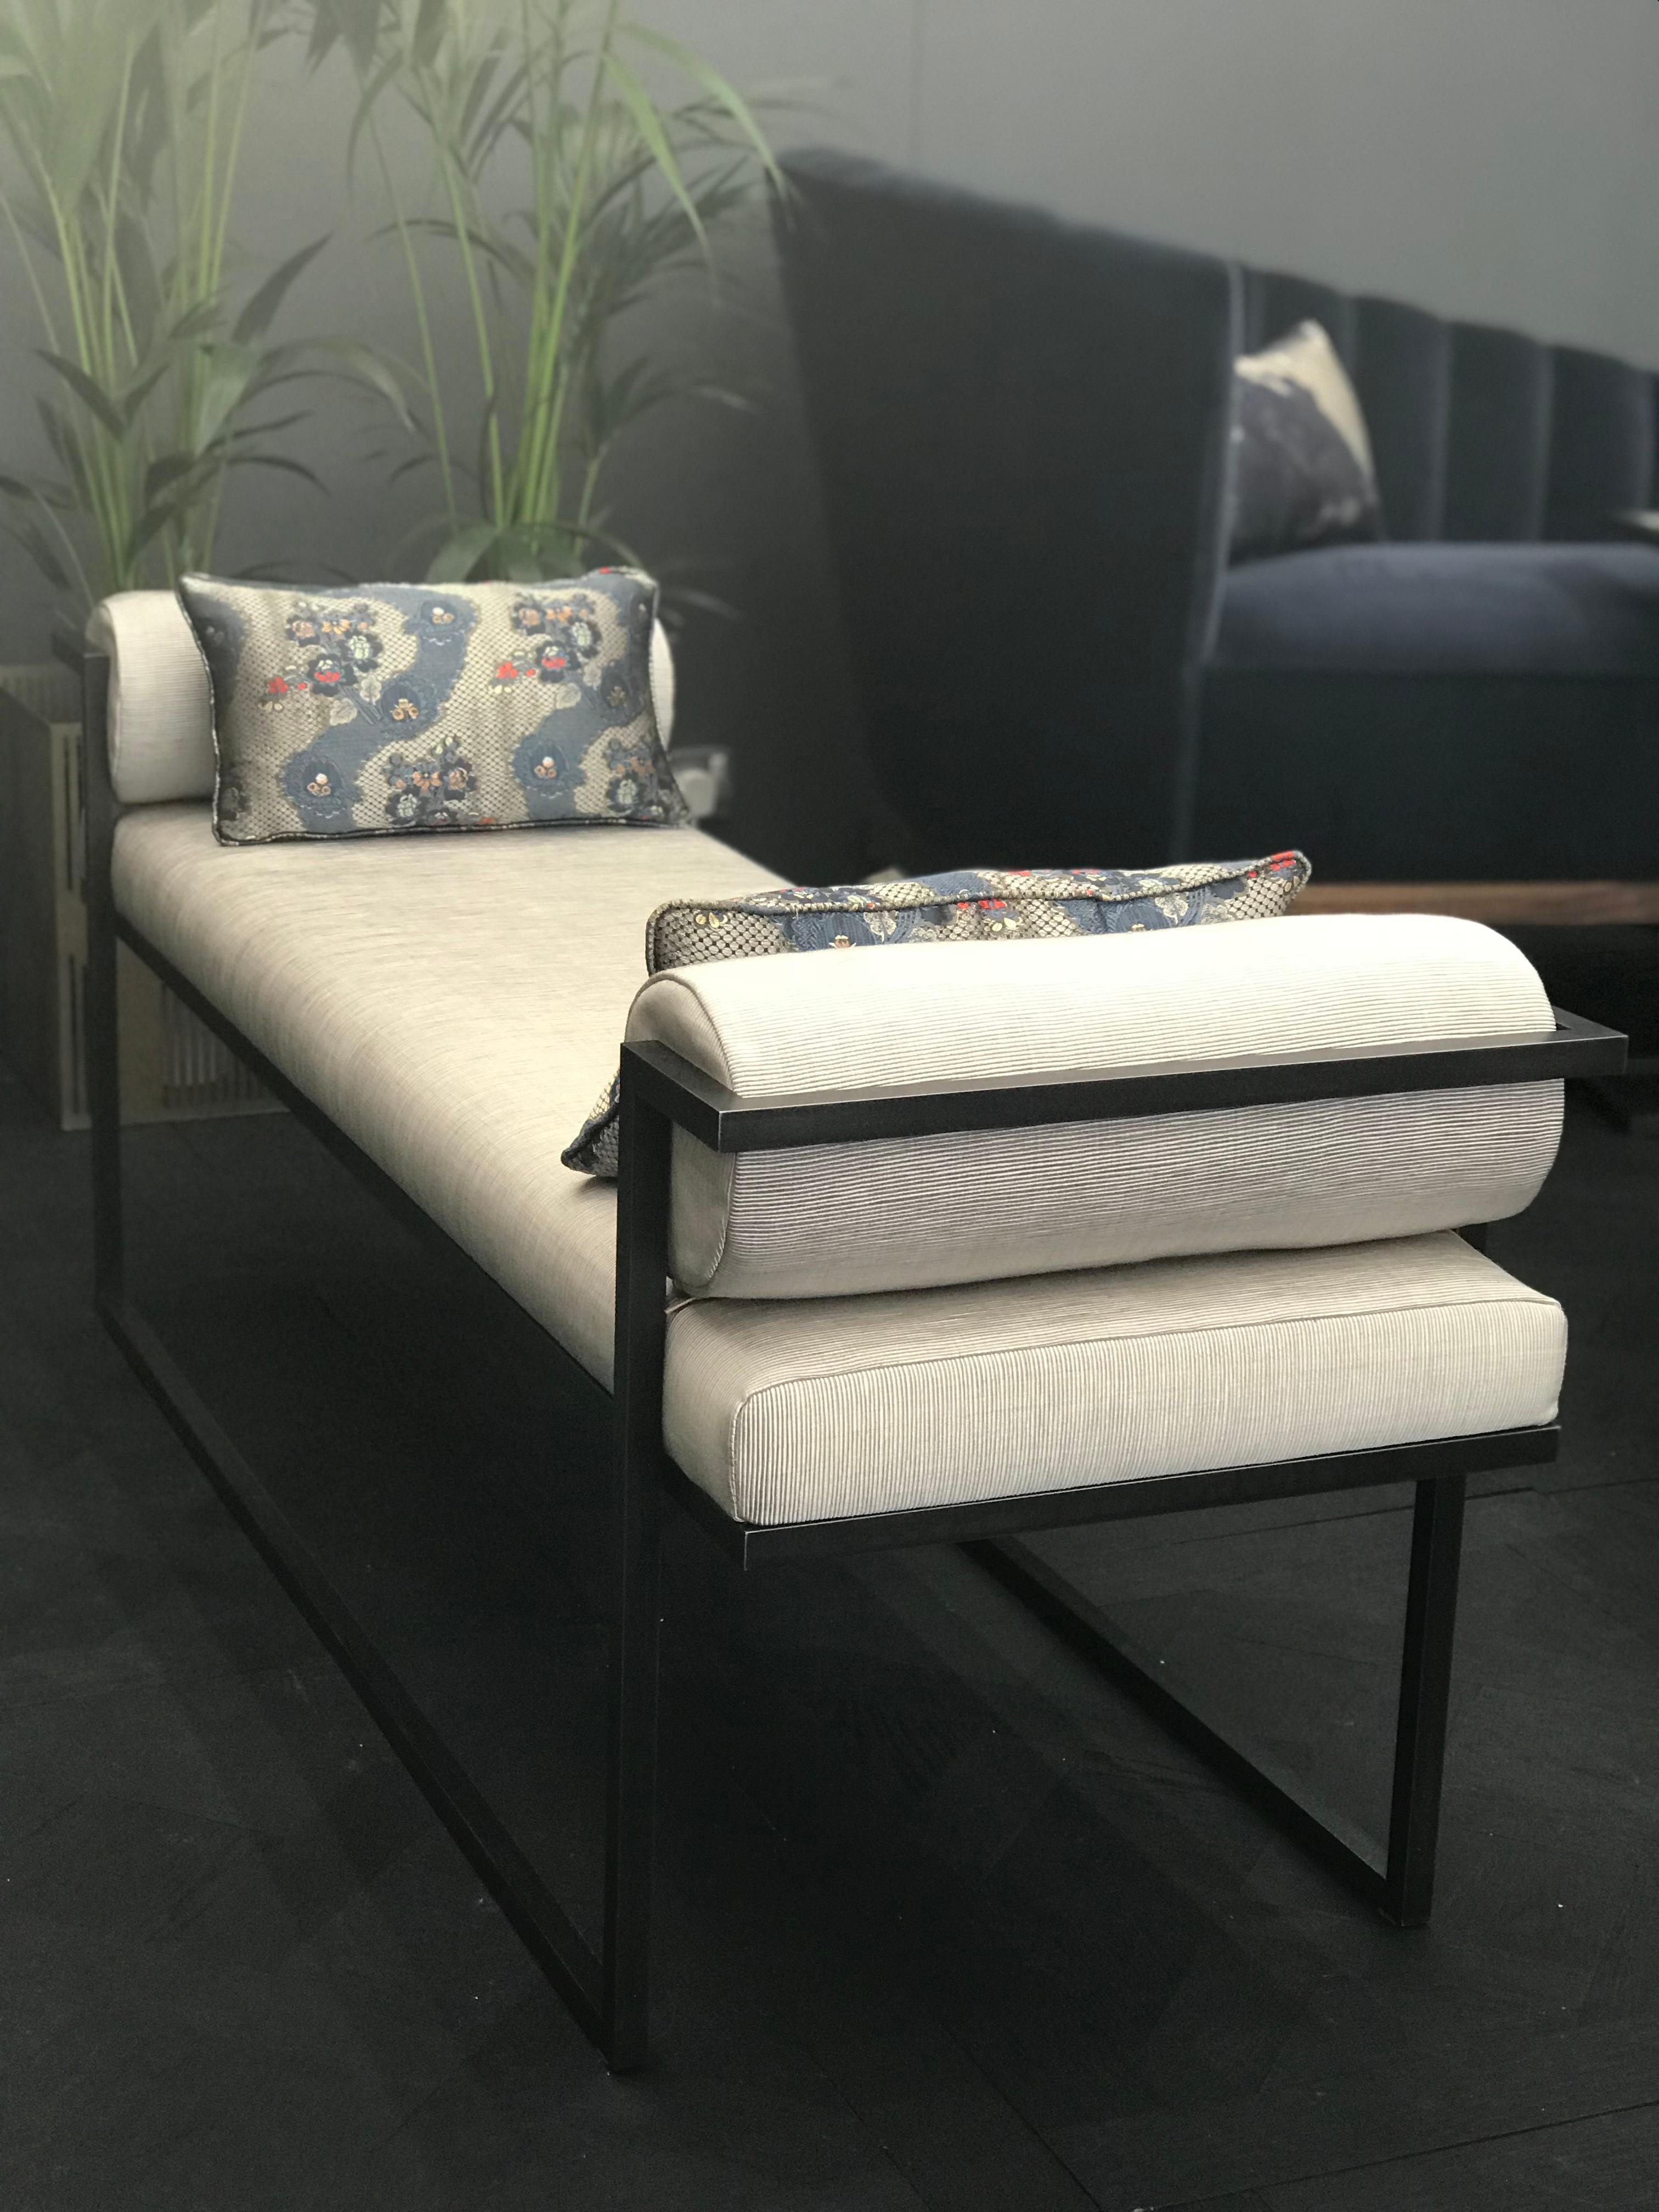 Named after the Greek god of sexual attraction, the Eros bench will visually seduce with its architectural lines and demanding presence. Made from blackened steel and upholstered in one of Casa Botelho’s luxe fabrics, the Eros bench is an ideal